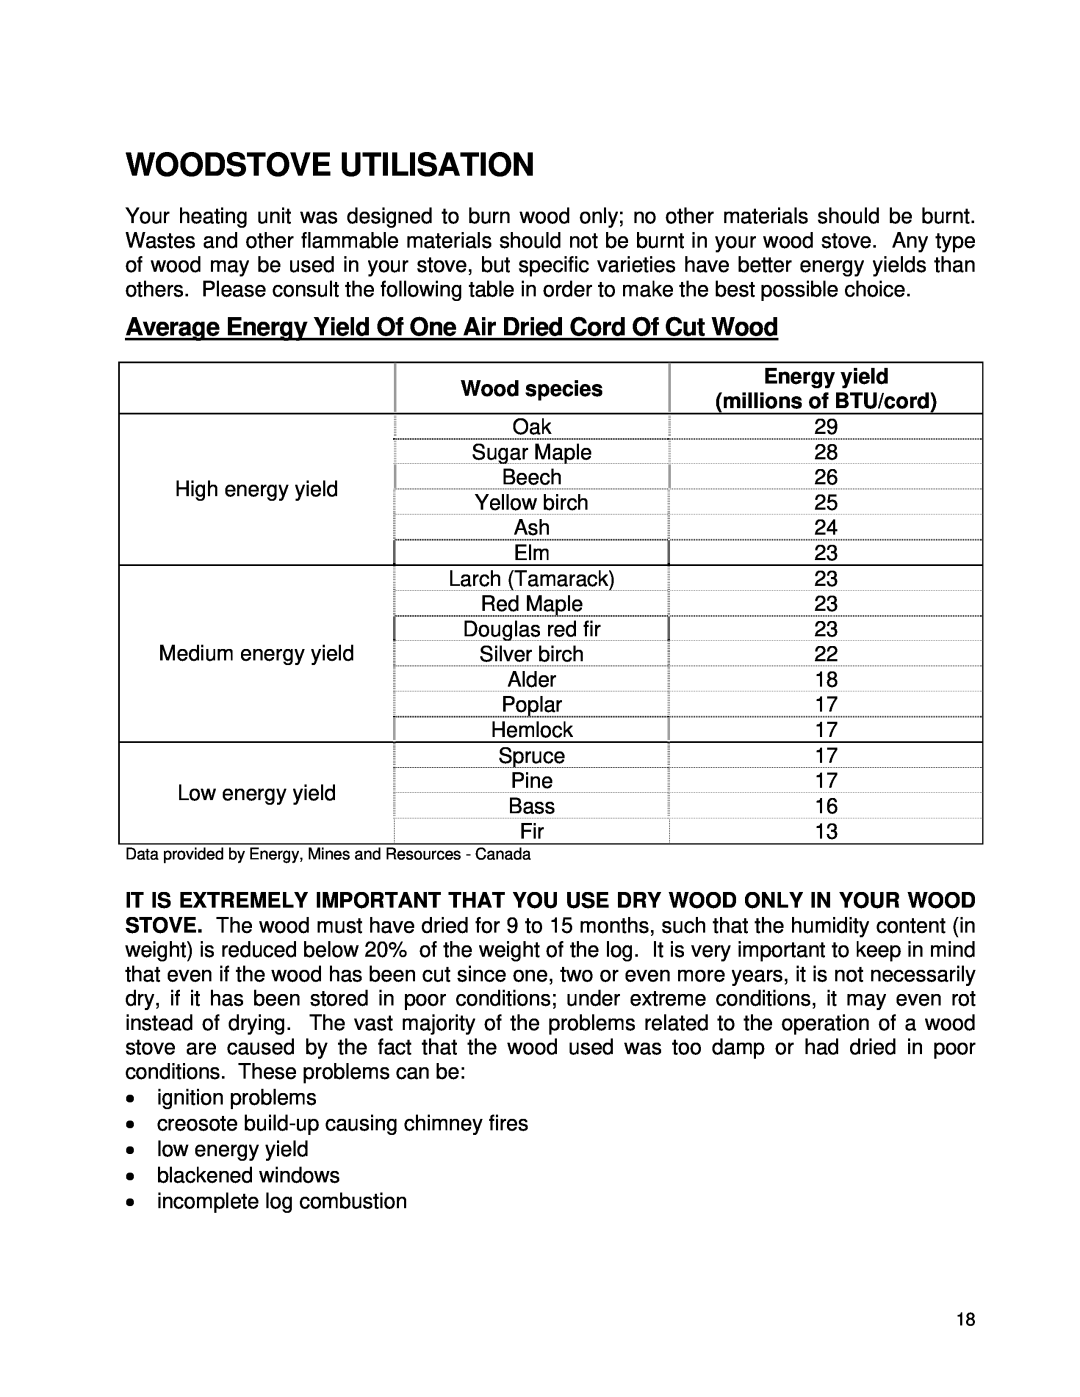 Drolet NG1800 owner manual Woodstove Utilisation, Average Energy Yield Of One Air Dried Cord Of Cut Wood 